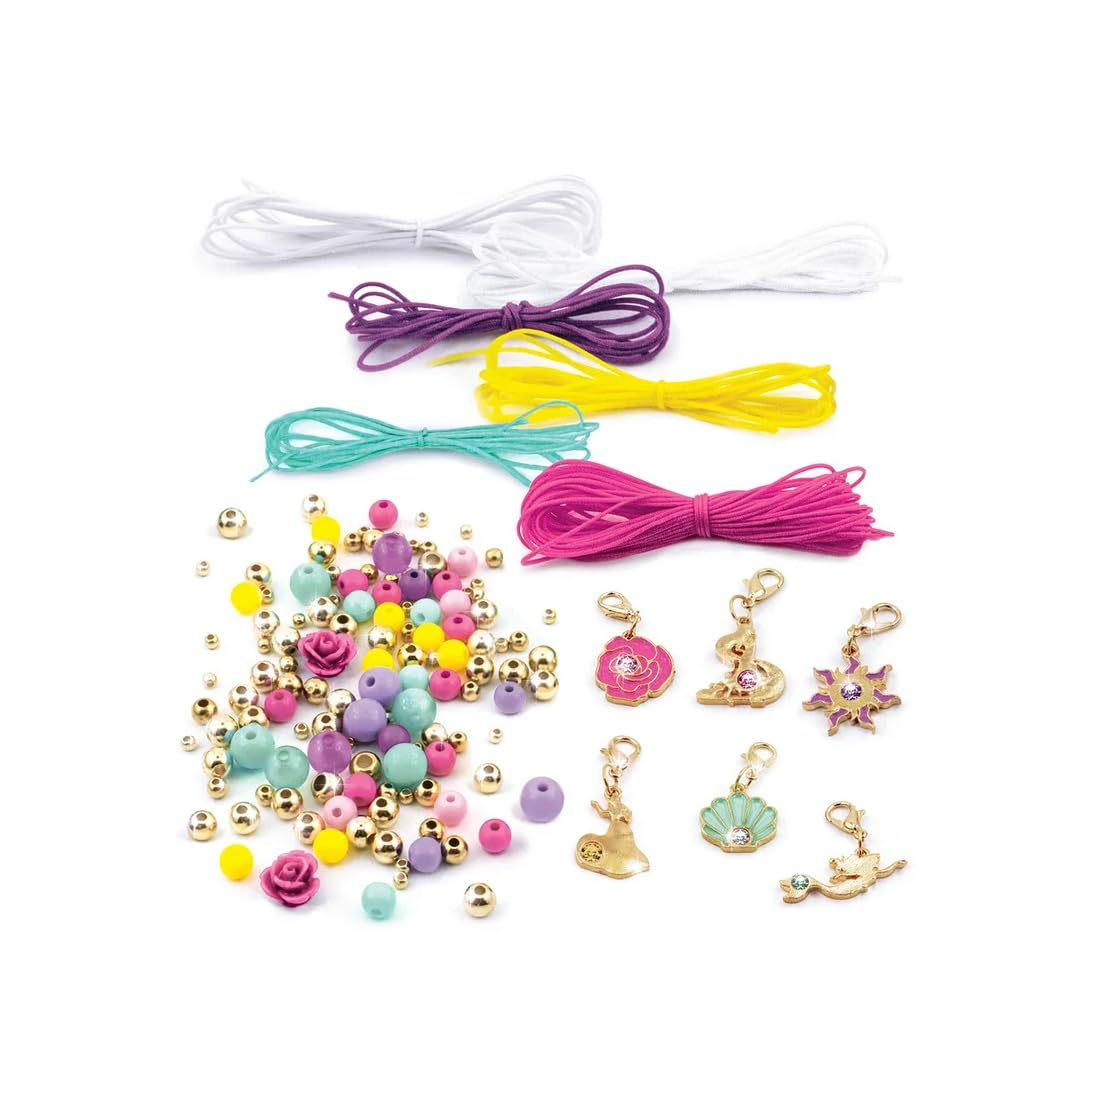 Make It Real - Disney Princess Crystal Dreams Jewelry - DIY Bead & Charm Bracelet Making Kit - Includes Jewelry Making Supplies, Charms with Swarovski Crystals & Exclusive Disney Princess Book